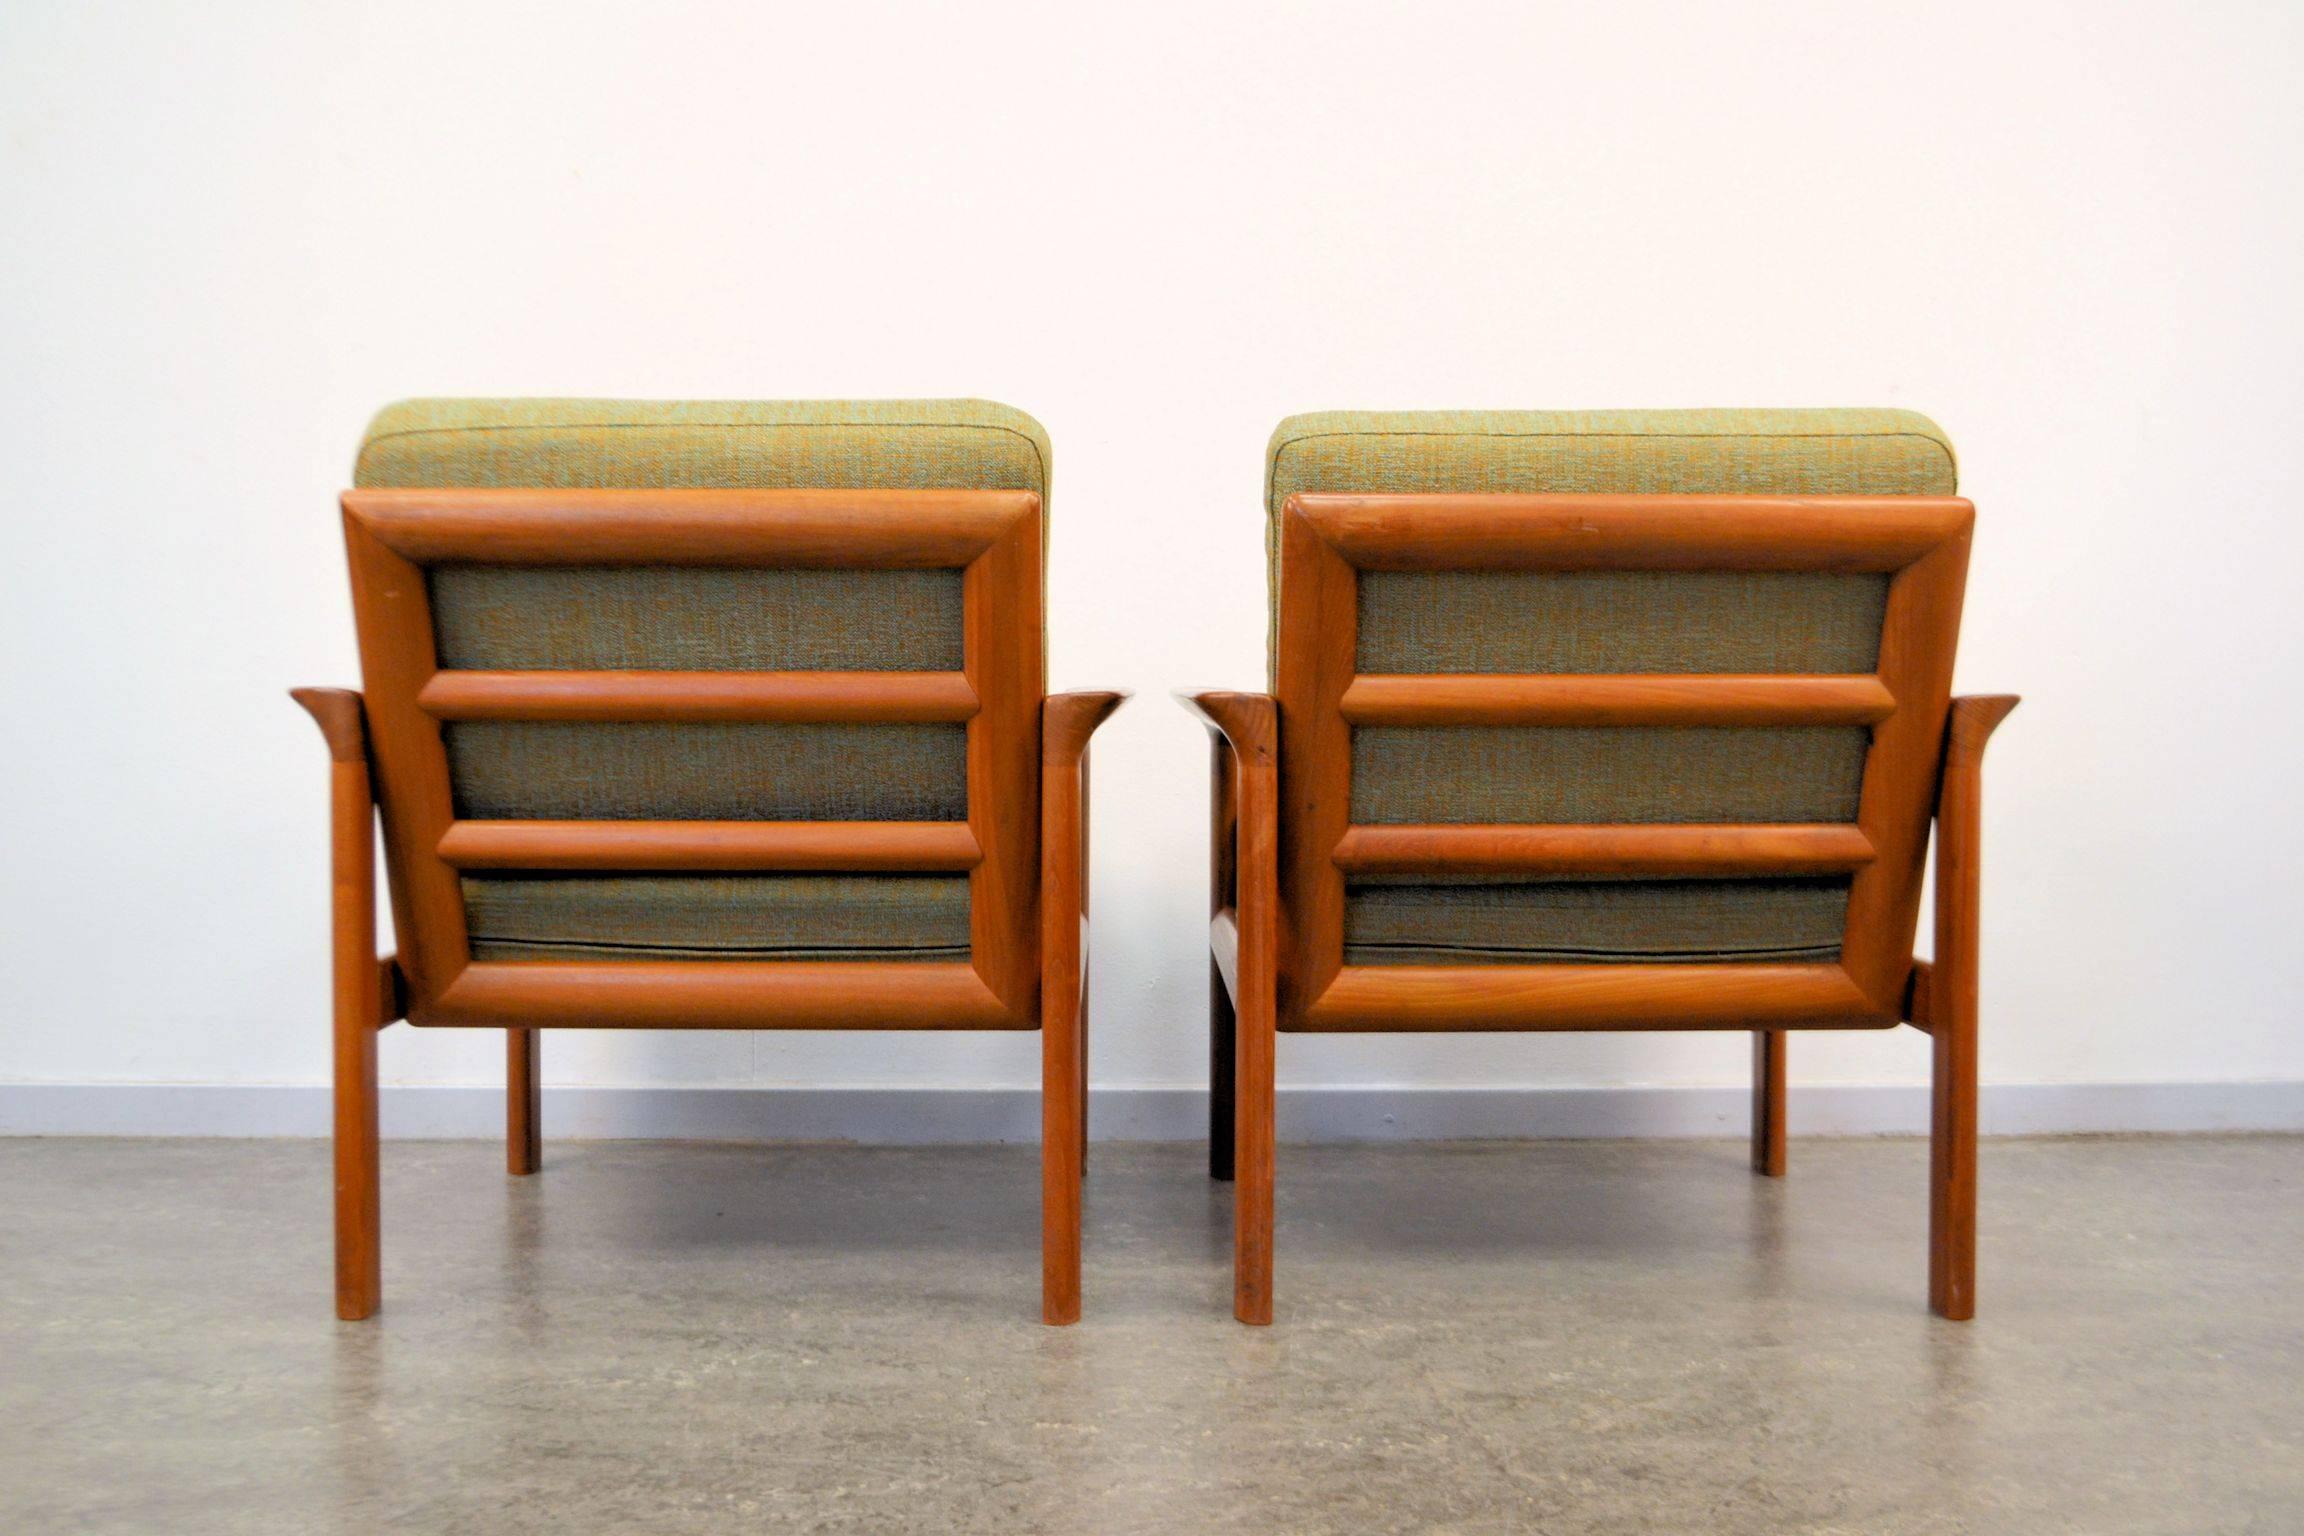 Mid-20th Century Danish Modern Easy Chairs by Sven Ellekaer For Sale